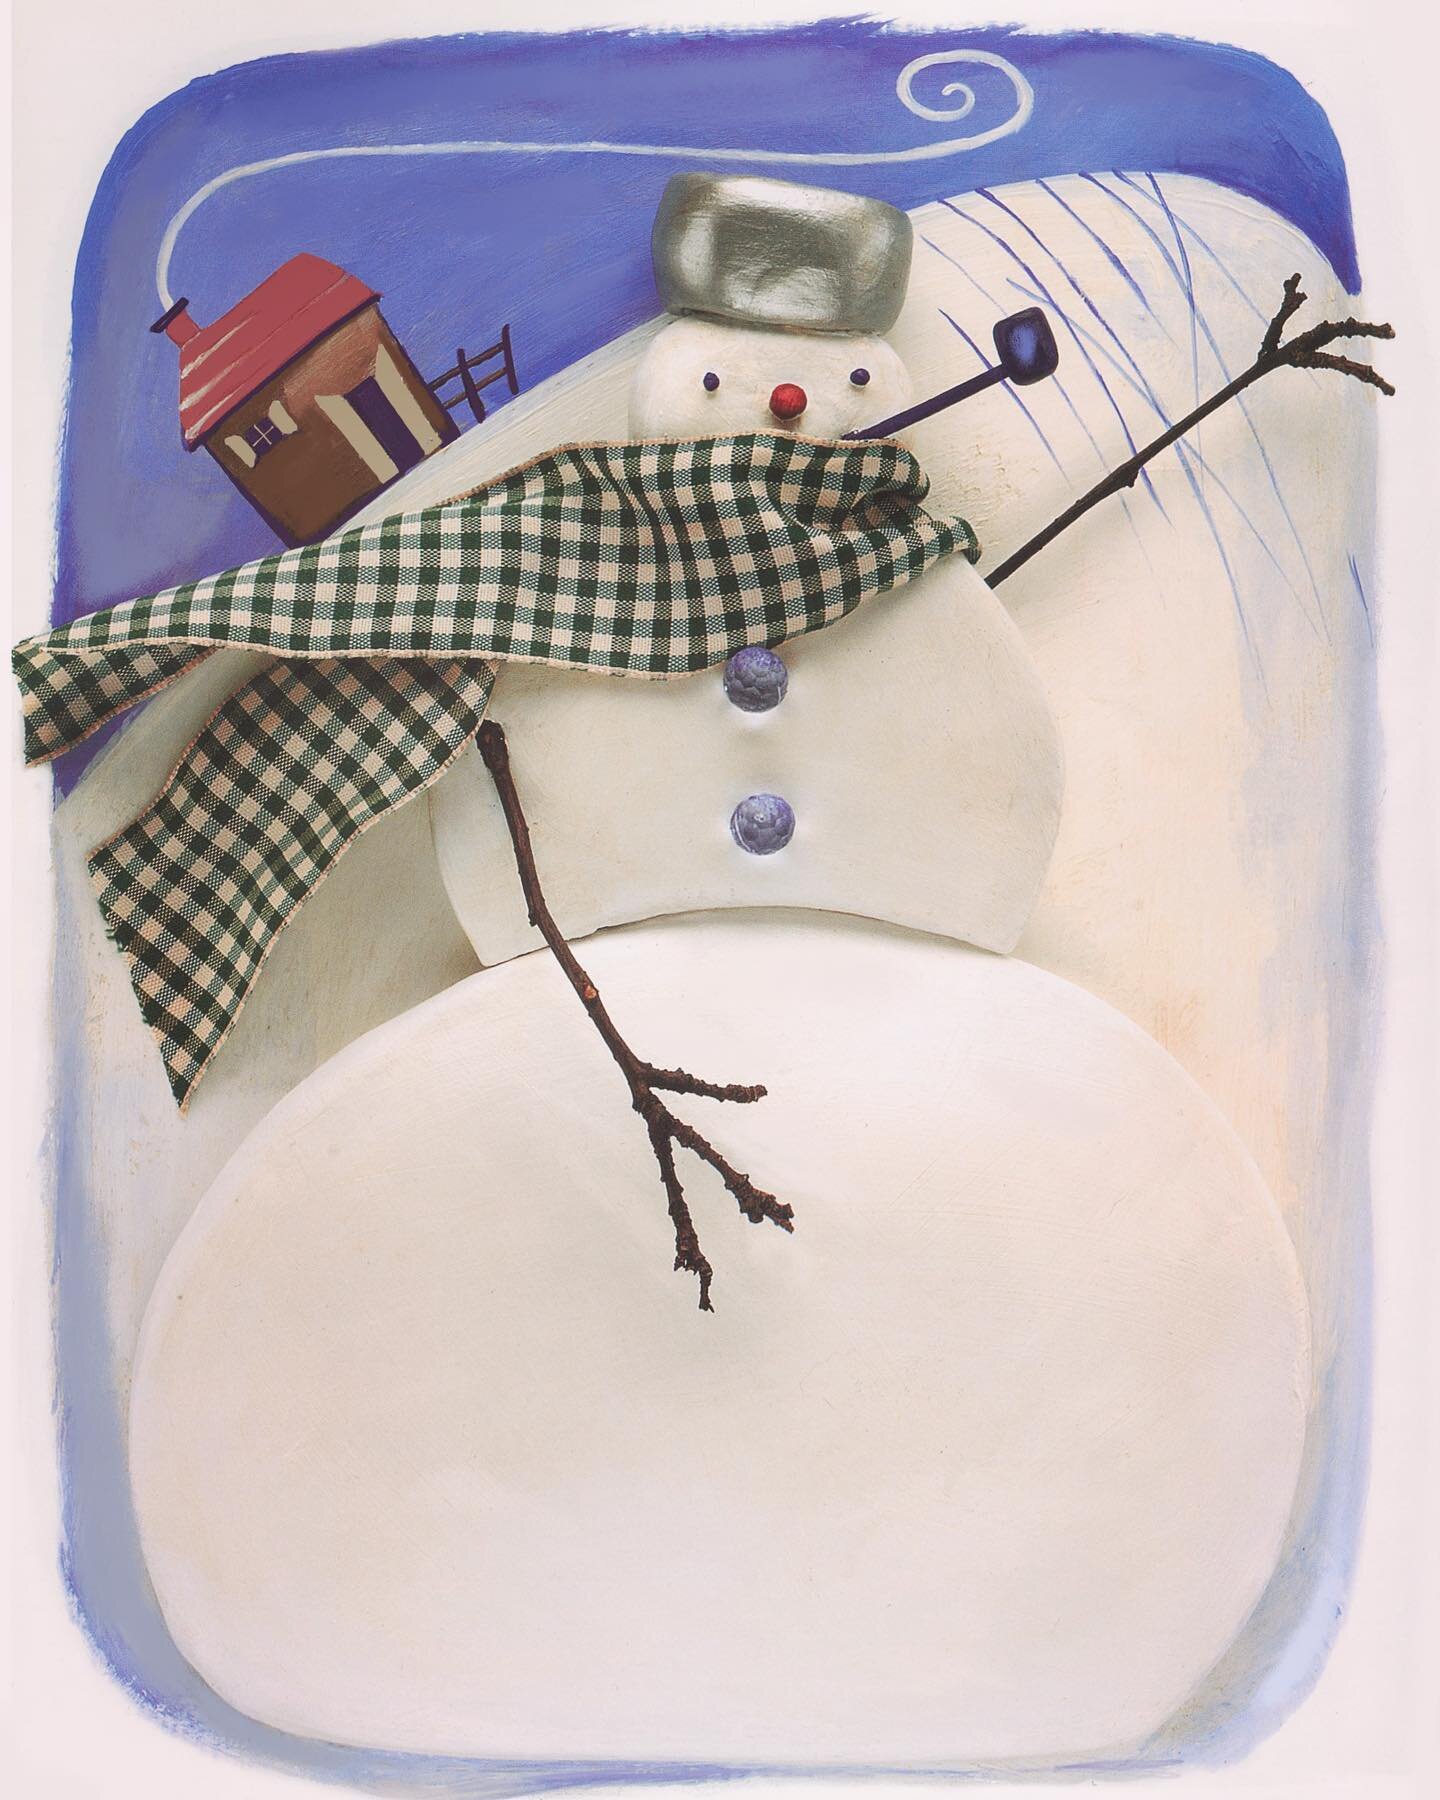 Getting excited about this time of year!
#snowman #snowmanillustration #christmascard #christmascarddesign #artistsofinsta #holiday